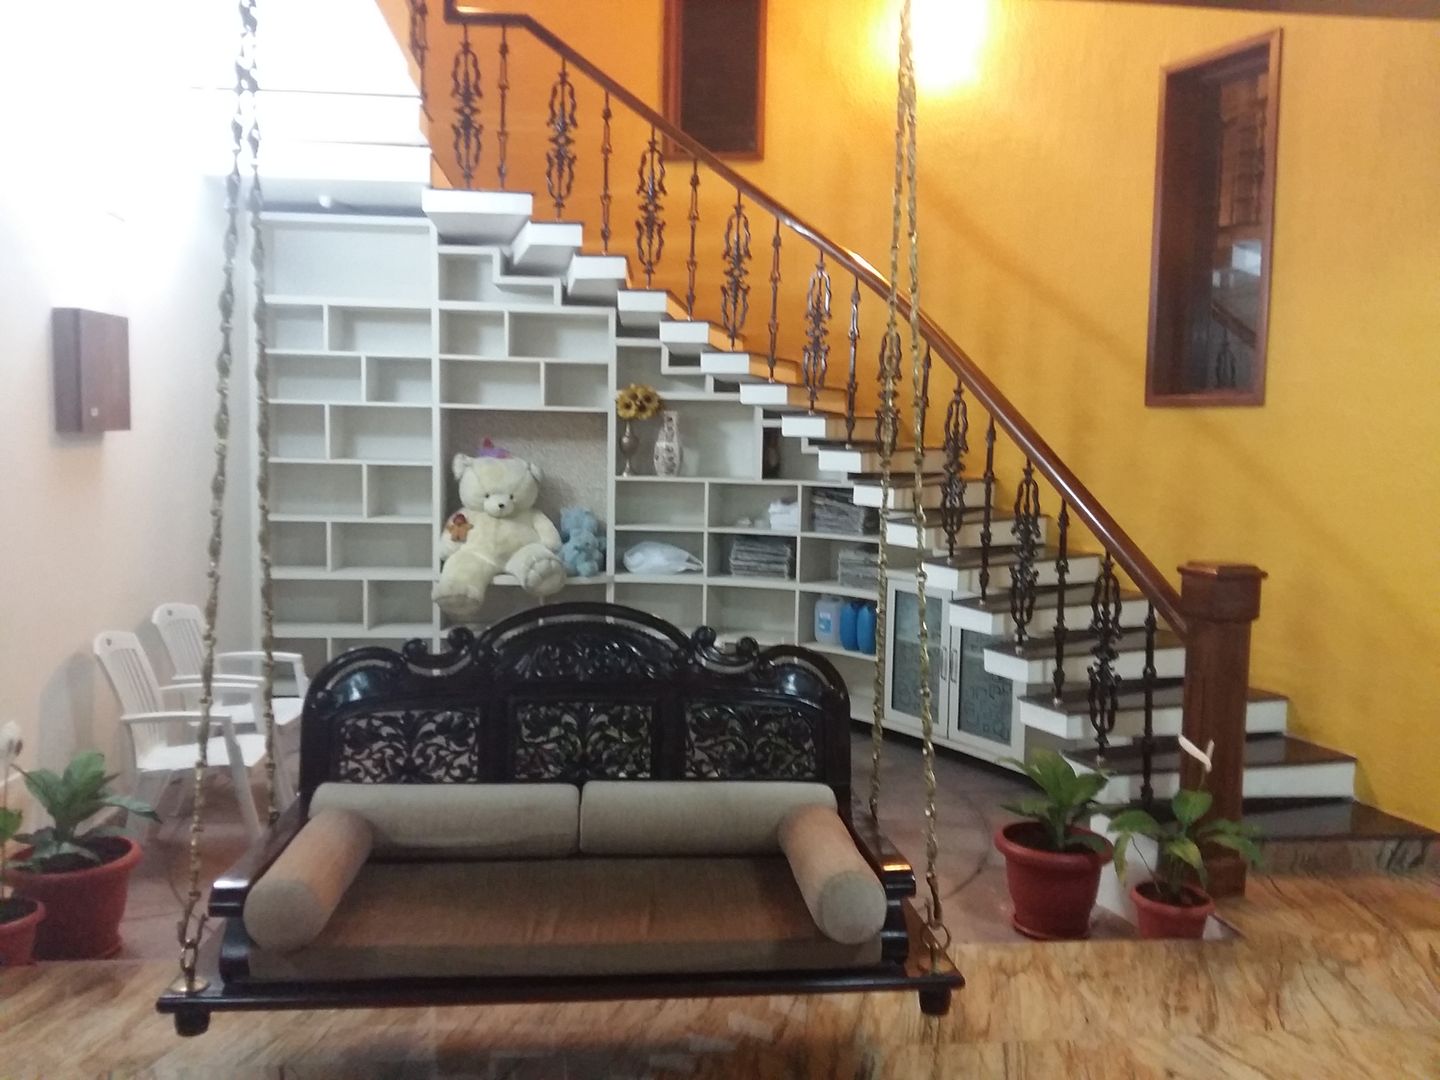 ANUGRAHA - RESIDENCE FOR MR.MUKUND, One Brick At A Time One Brick At A Time Stairs